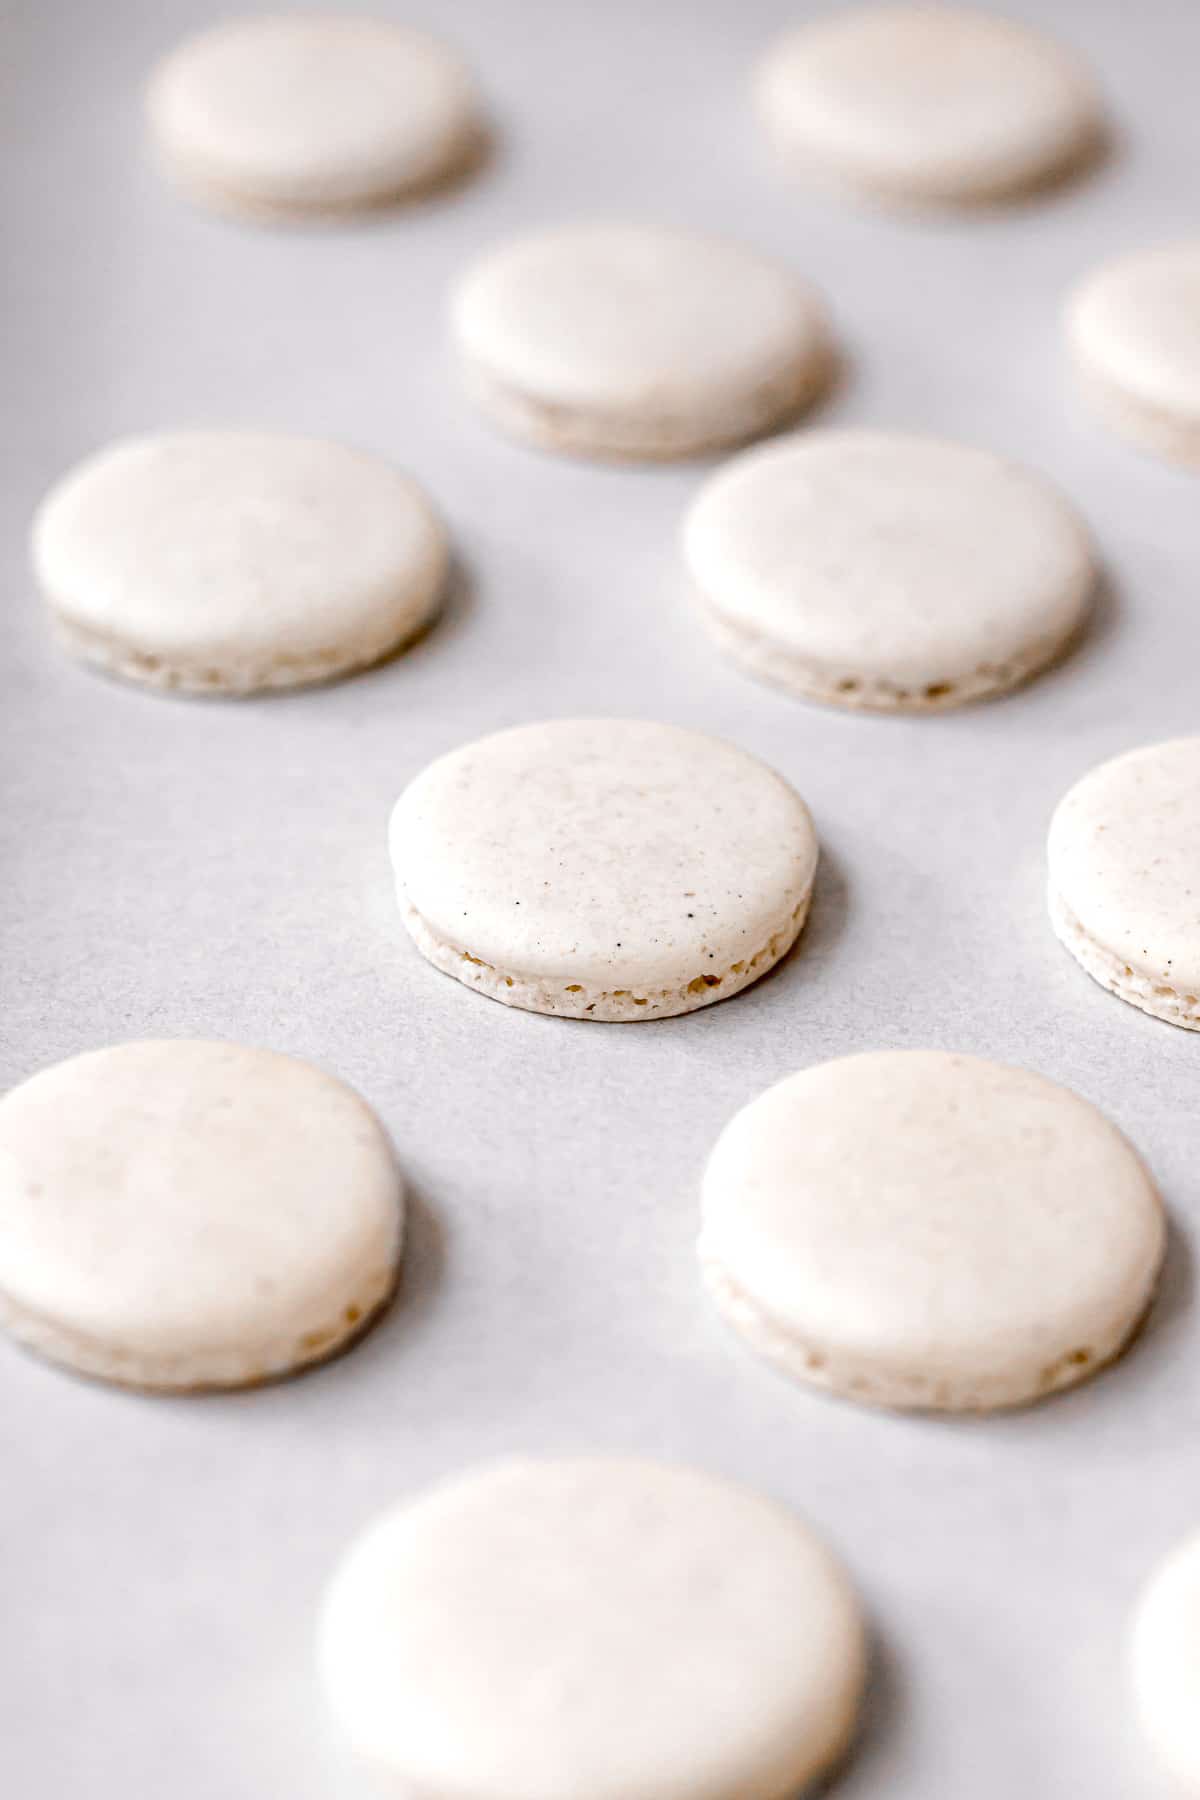 baked macarons on parchment lined baking sheet.